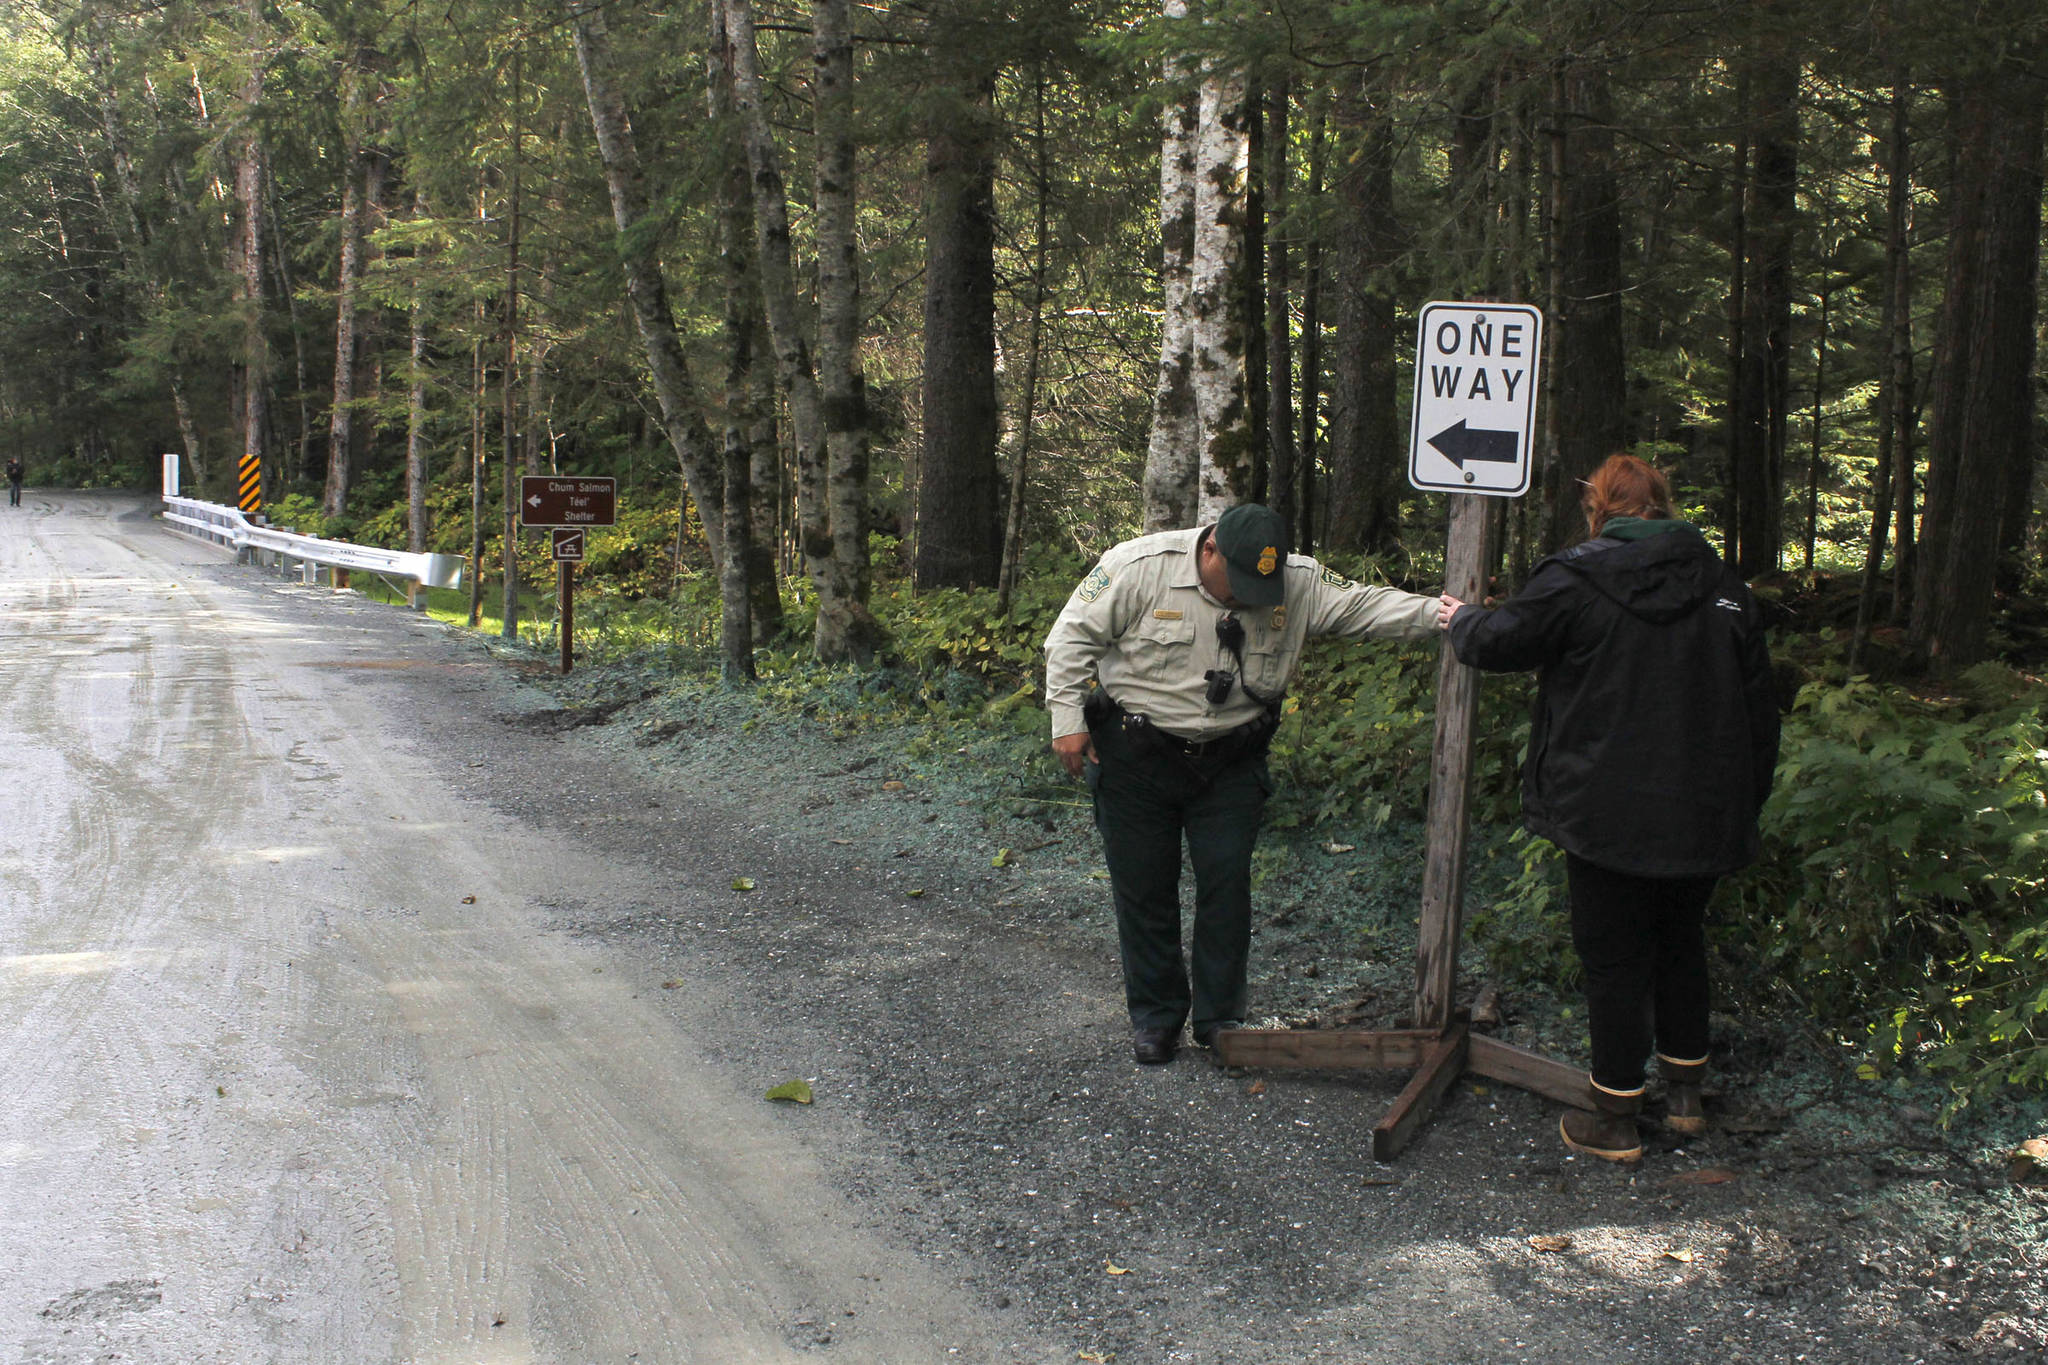 U.S. Forest Service Officer Dave Zuniga and U.S. Forest Service Cabins and Recreation employee Caty Beckel place a road sign at the newly improved Lena Beach Recreation Area on Saturday, Sept. 1, 2018. (Alex McCarthy | Juneau Empire)